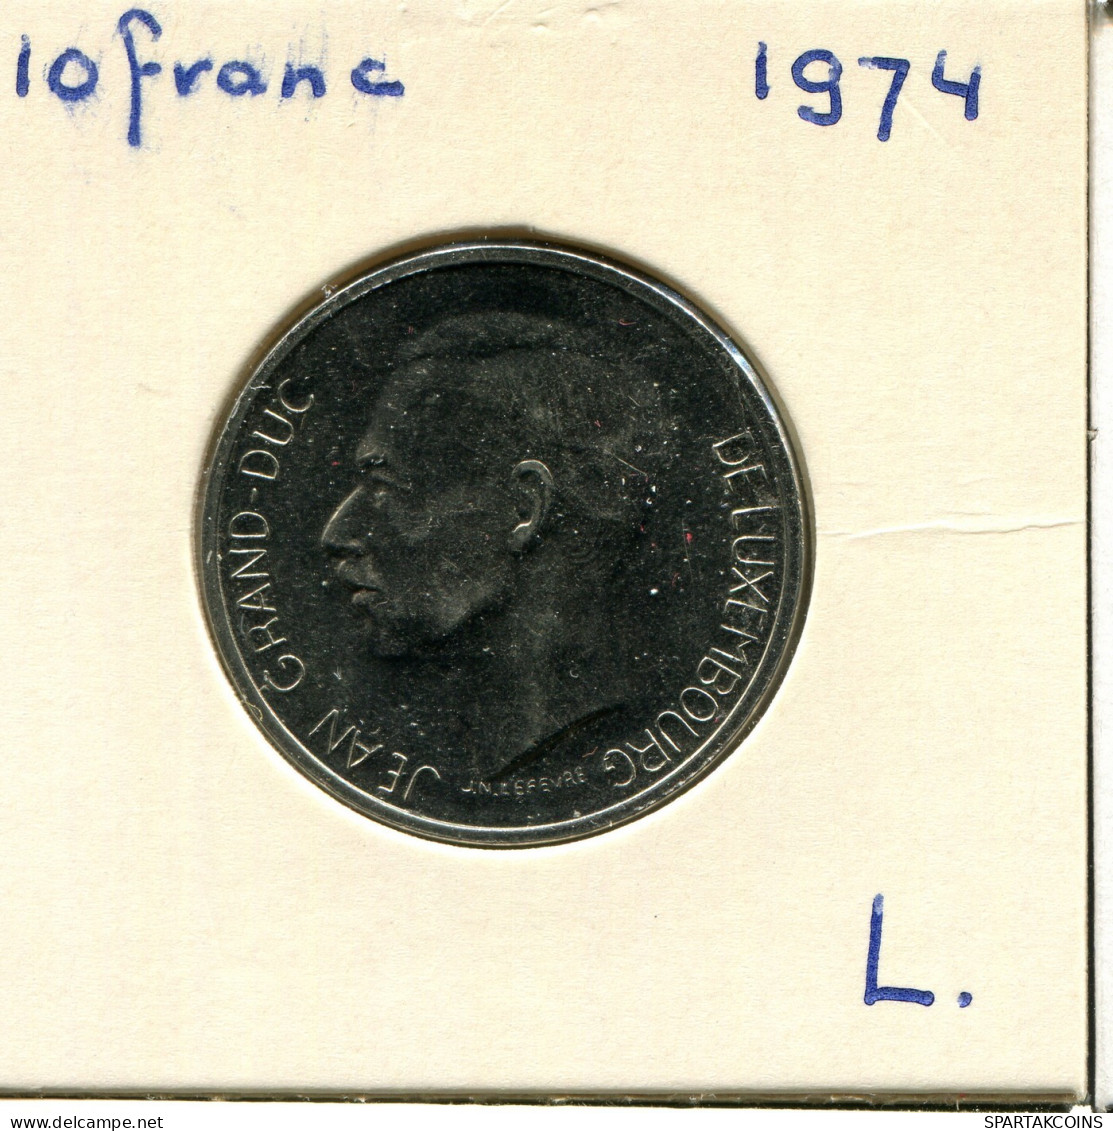 10 FRANCS 1974 LUXEMBOURG Pièce #AW832.F.A - Luxembourg